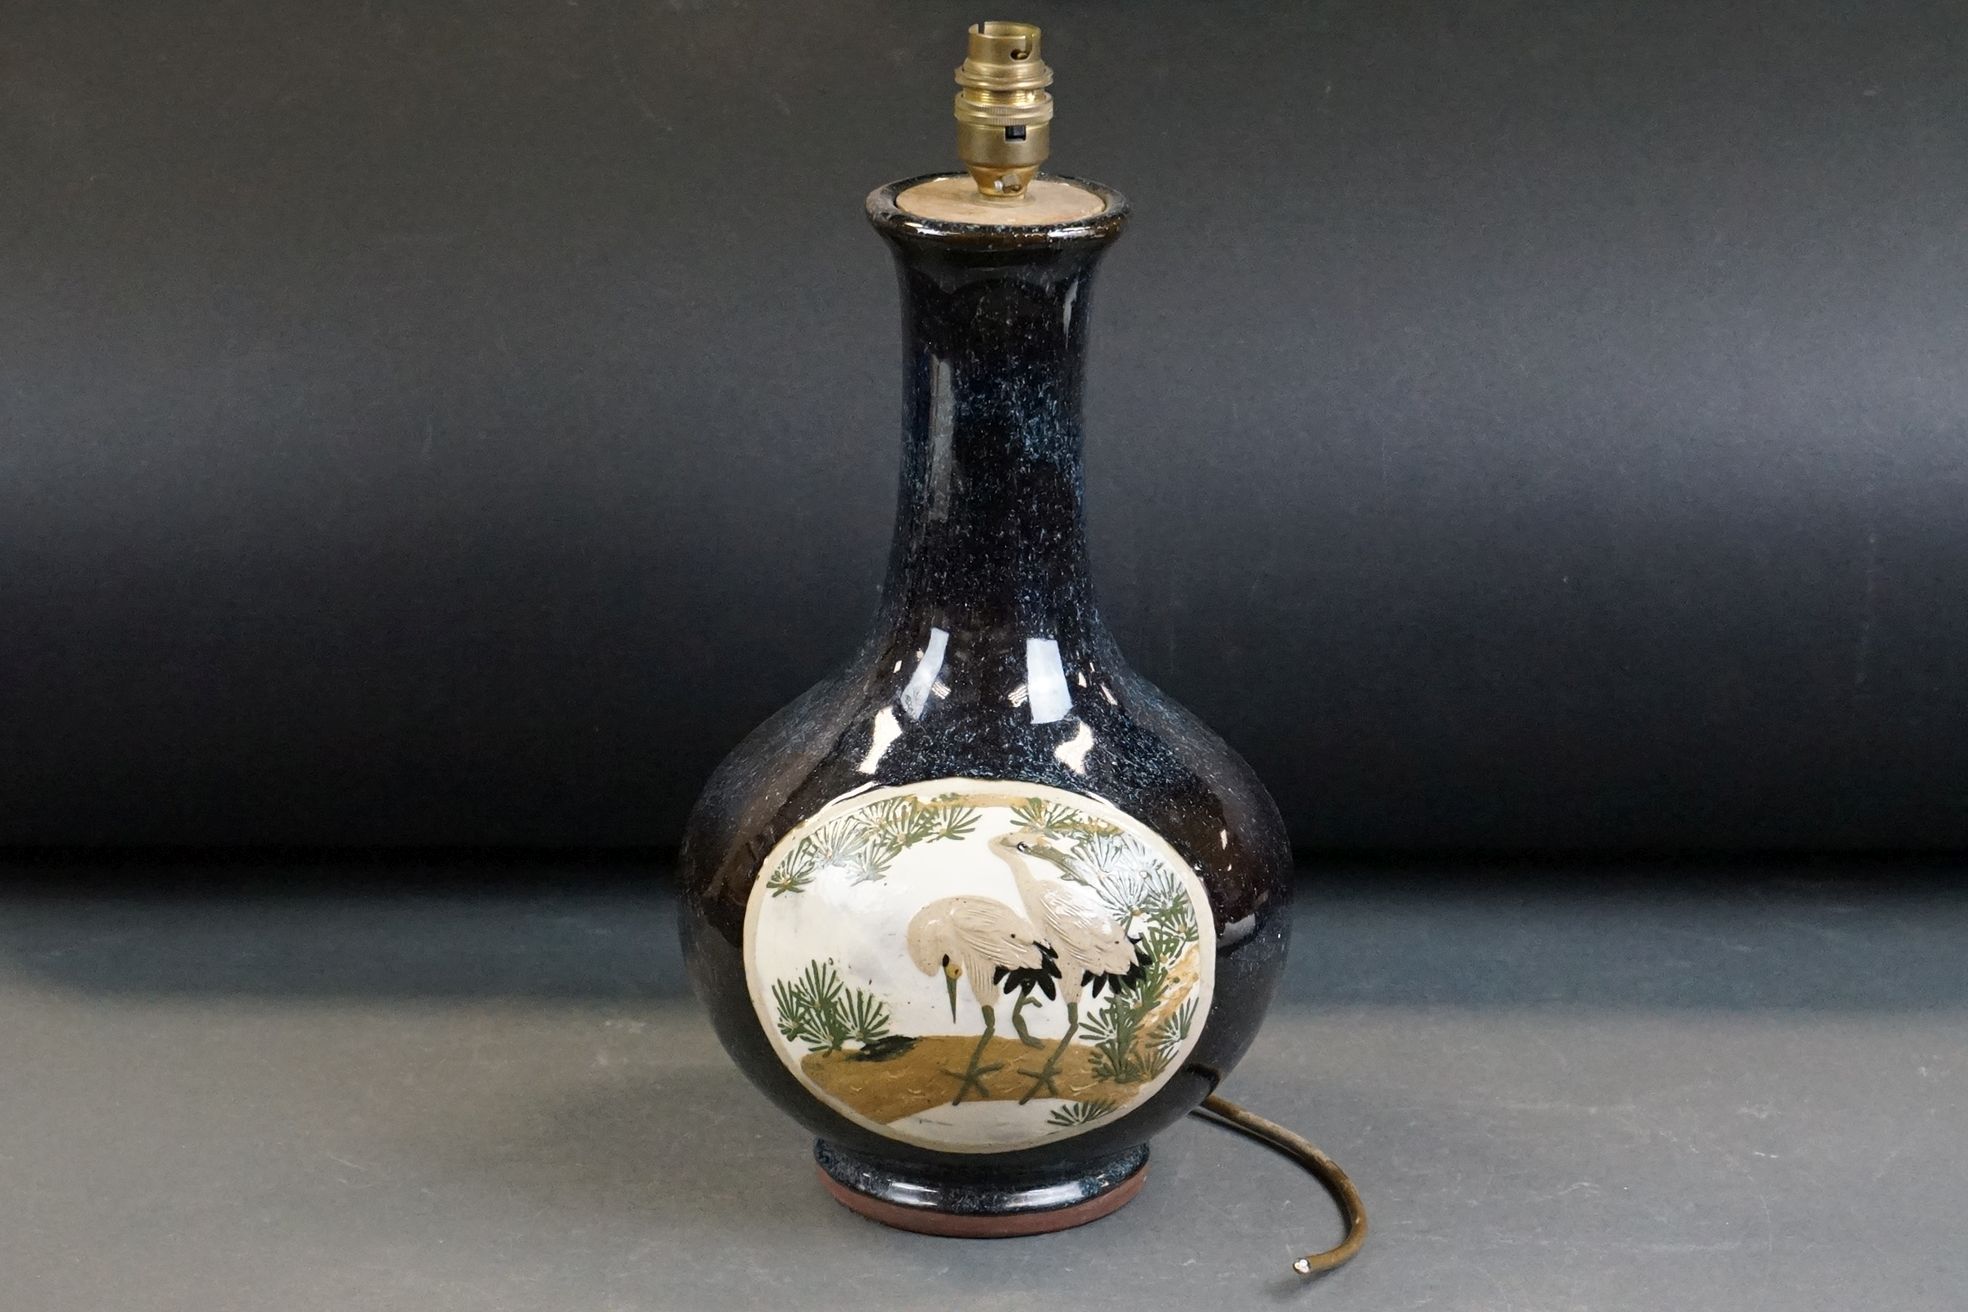 20th Century Pottery bottle vase with relief moulded stork panel decoration on a mottled blue